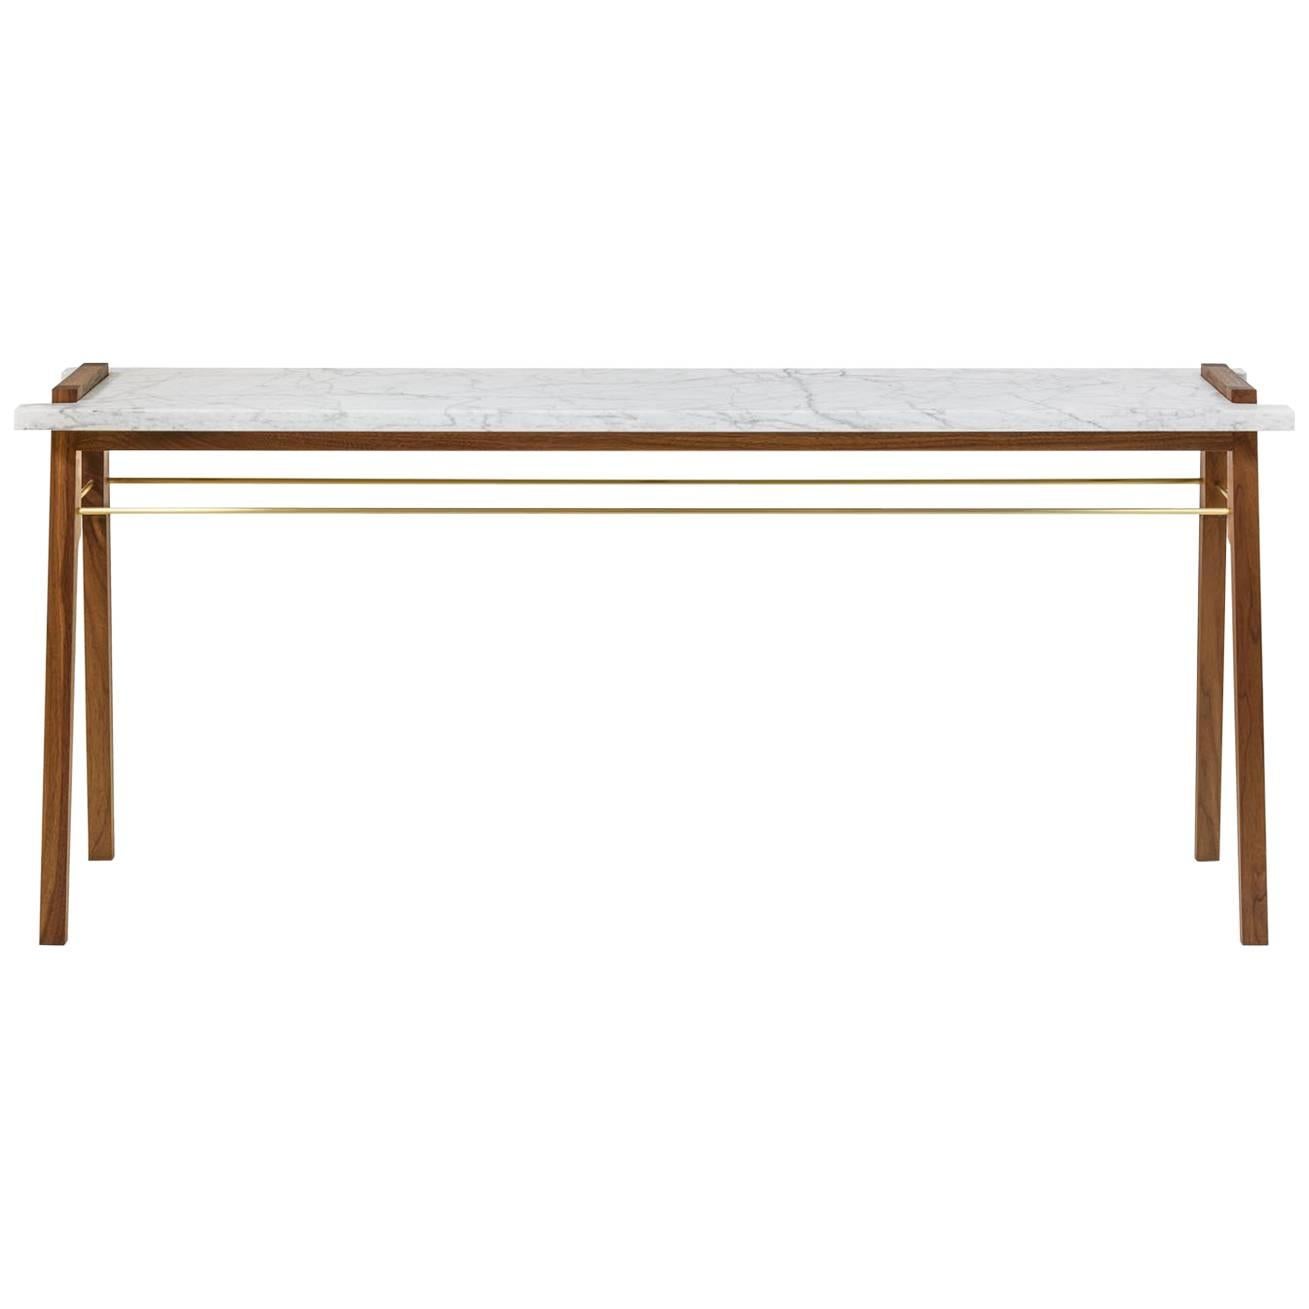 Riddick Console or Sofa Table with Marble Top on Walnut and Brass Base